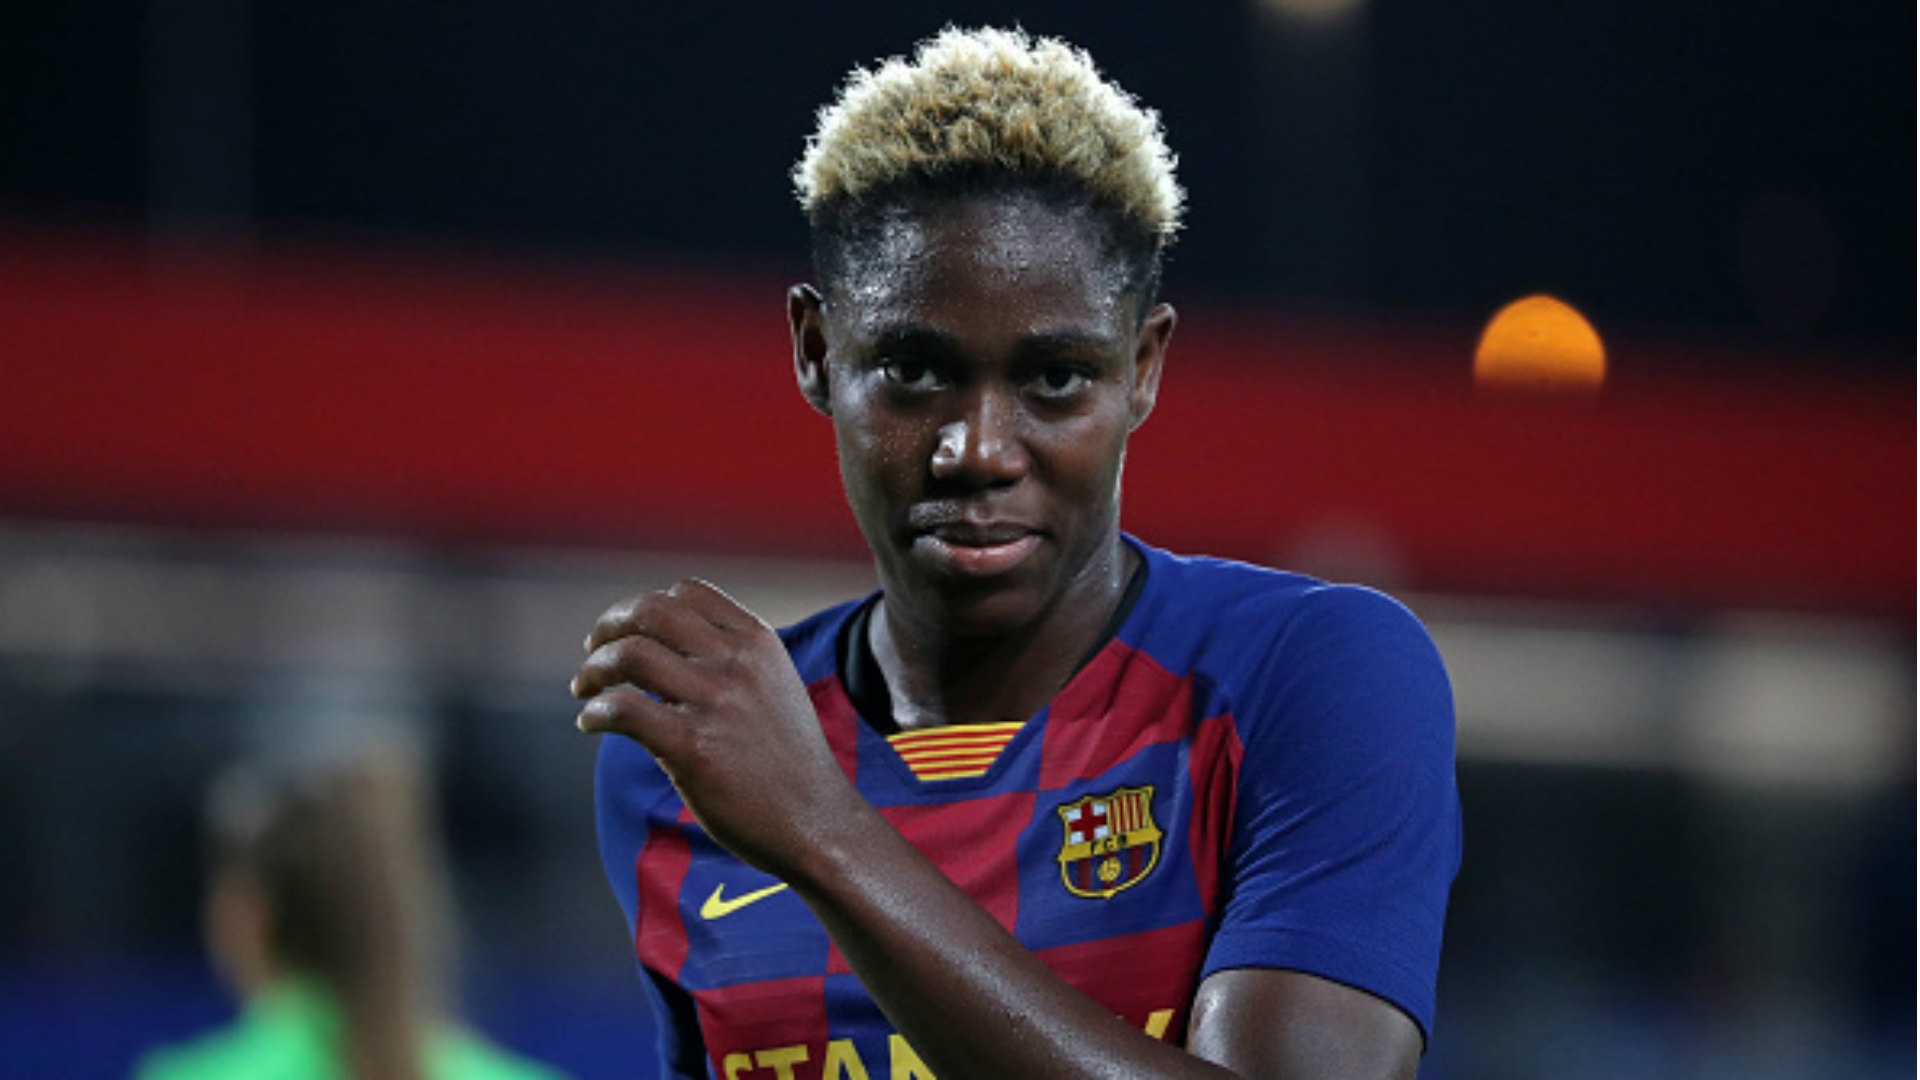 'The most important thing is to win' - Oshoala not thinking about scoring goals for Barcelona